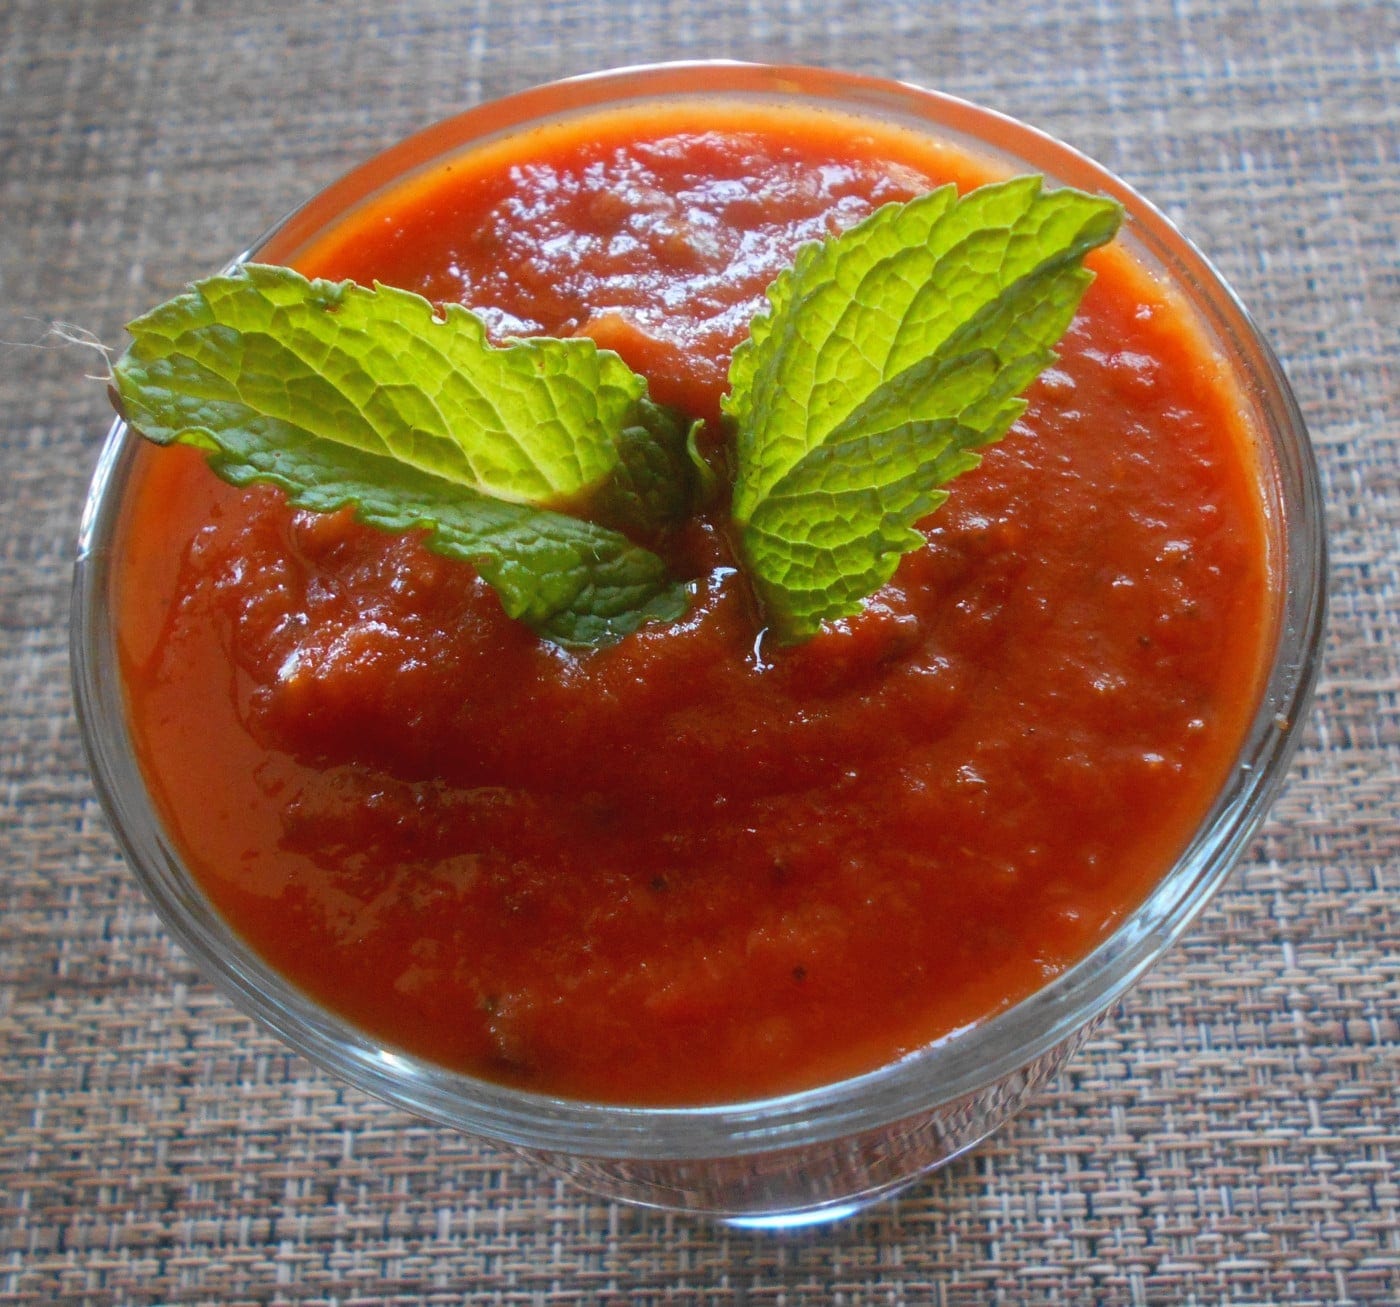 A glass bowl filled with homemade marinara sauce and topped with mint leaves for garnish